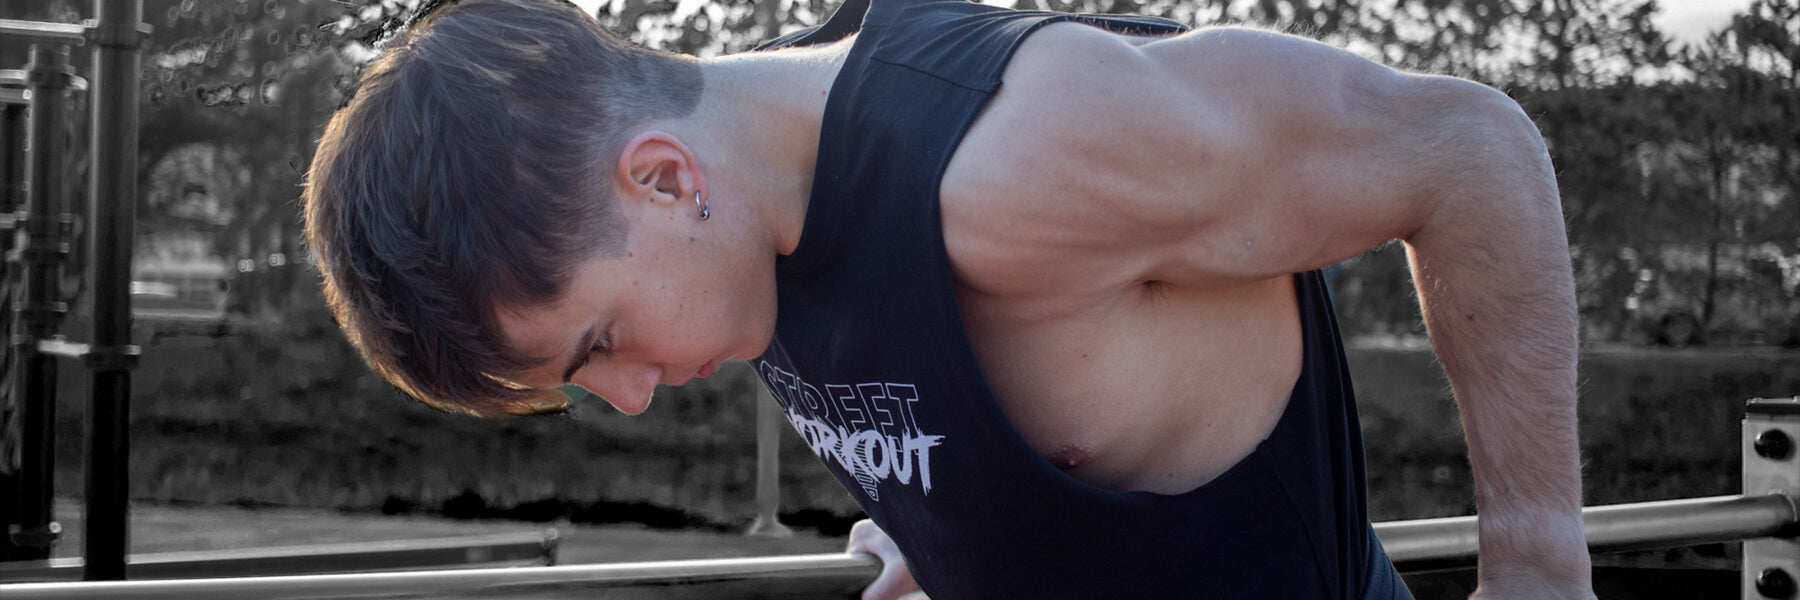 Street Workout - The Sport with your own Bodyweight